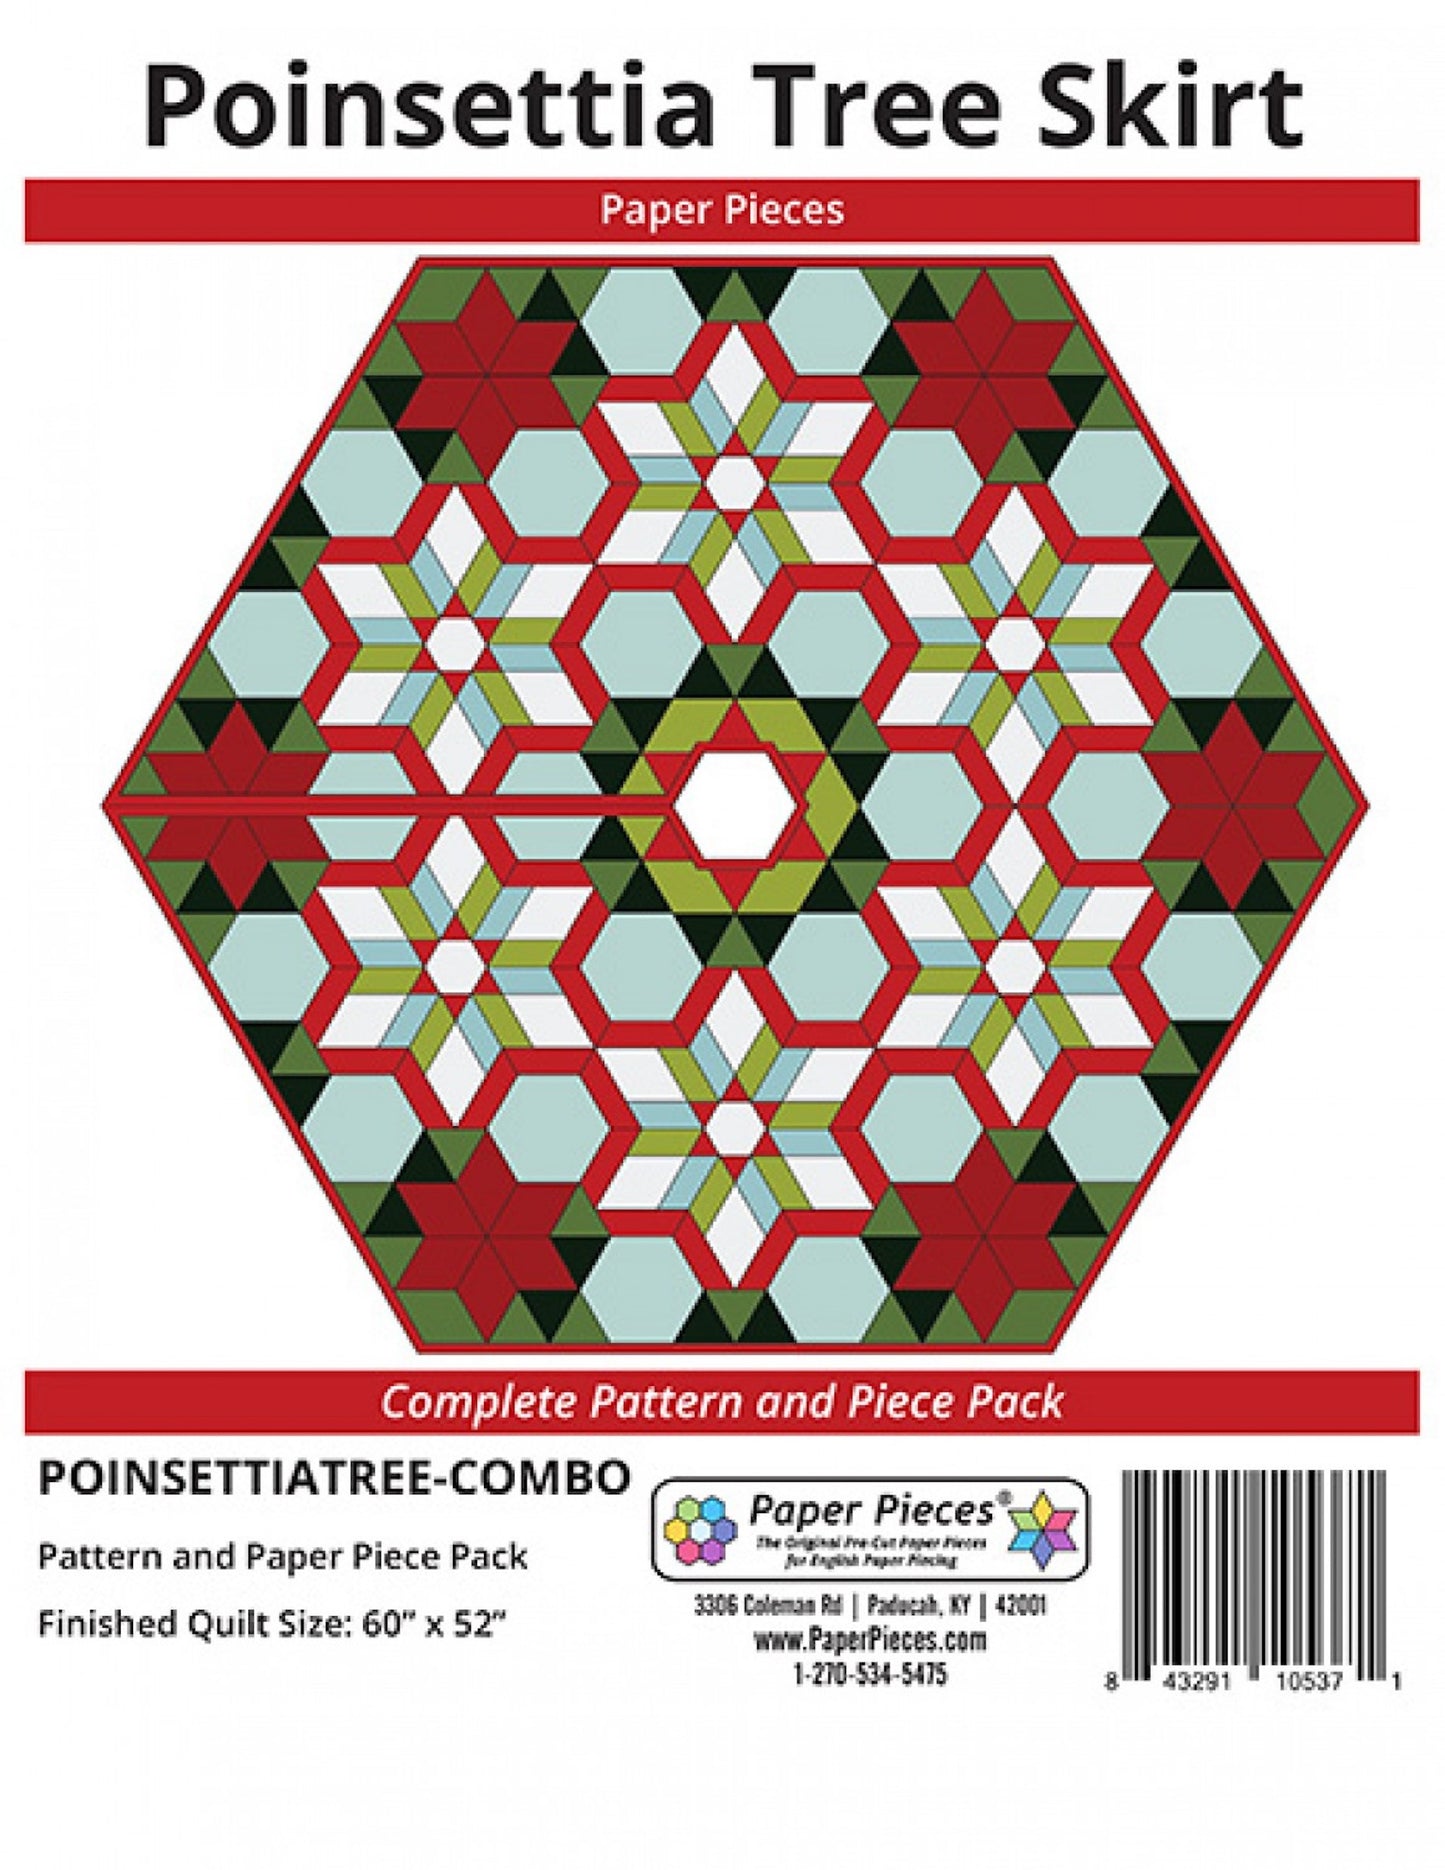 Poinsettia Tree Skirt Complete Pattern and Paper Piece Pack by Paper Pieces